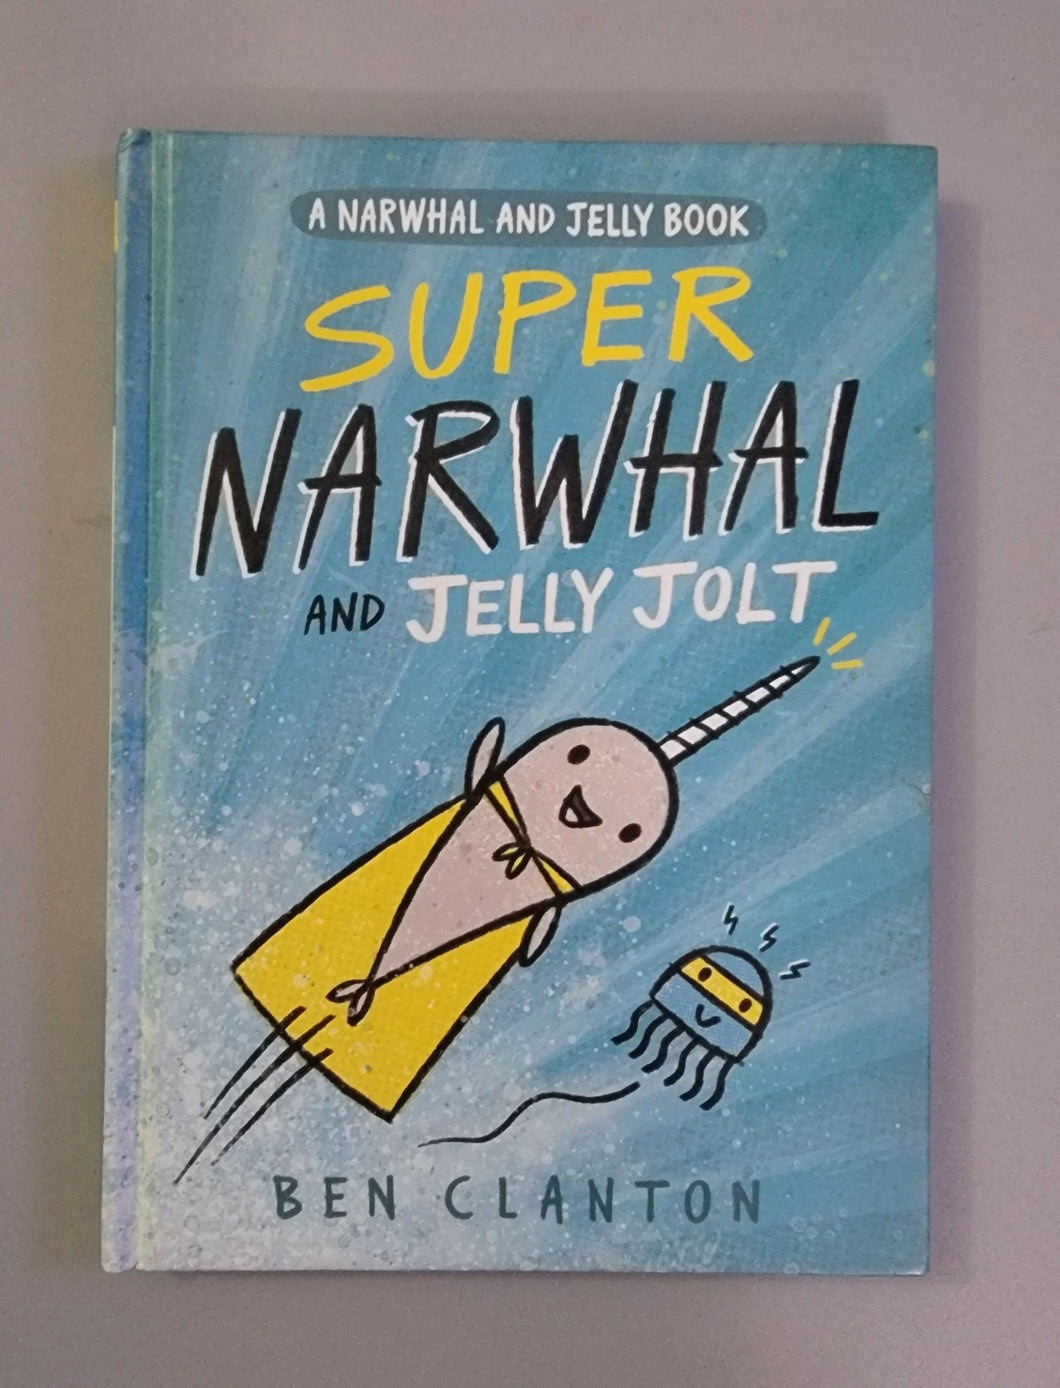 Super Narwhal and Jelly Jolt (A Narwhal and Jelly Book #2) by Ben Clanton  | Feb 27, 2018